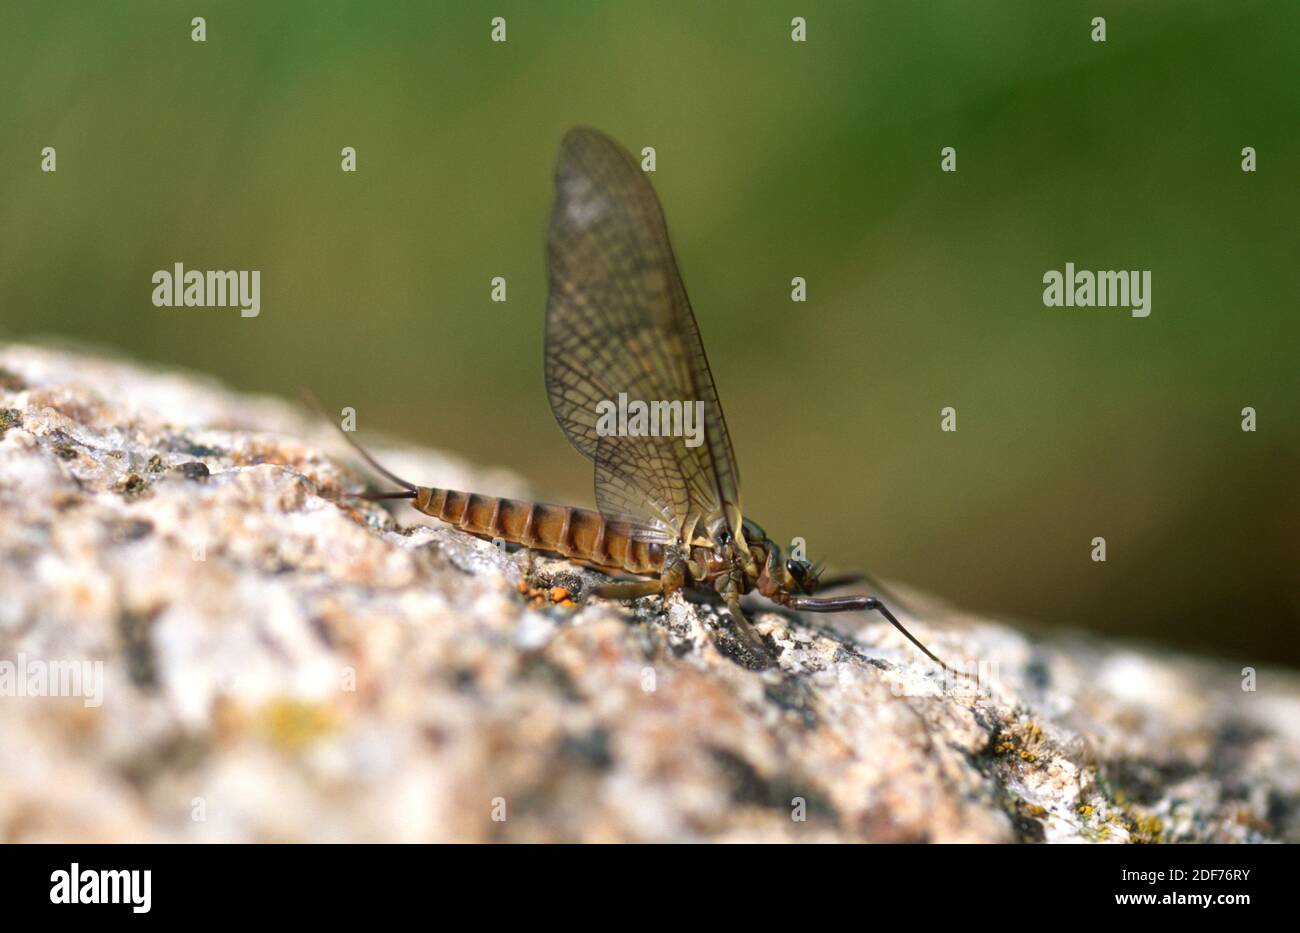 March brown mayfly (Rhithrogena germanica) is an insect used for fly fishing. This photo was taken near Setcases, Girona province, Catalonia, Spain. Stock Photo